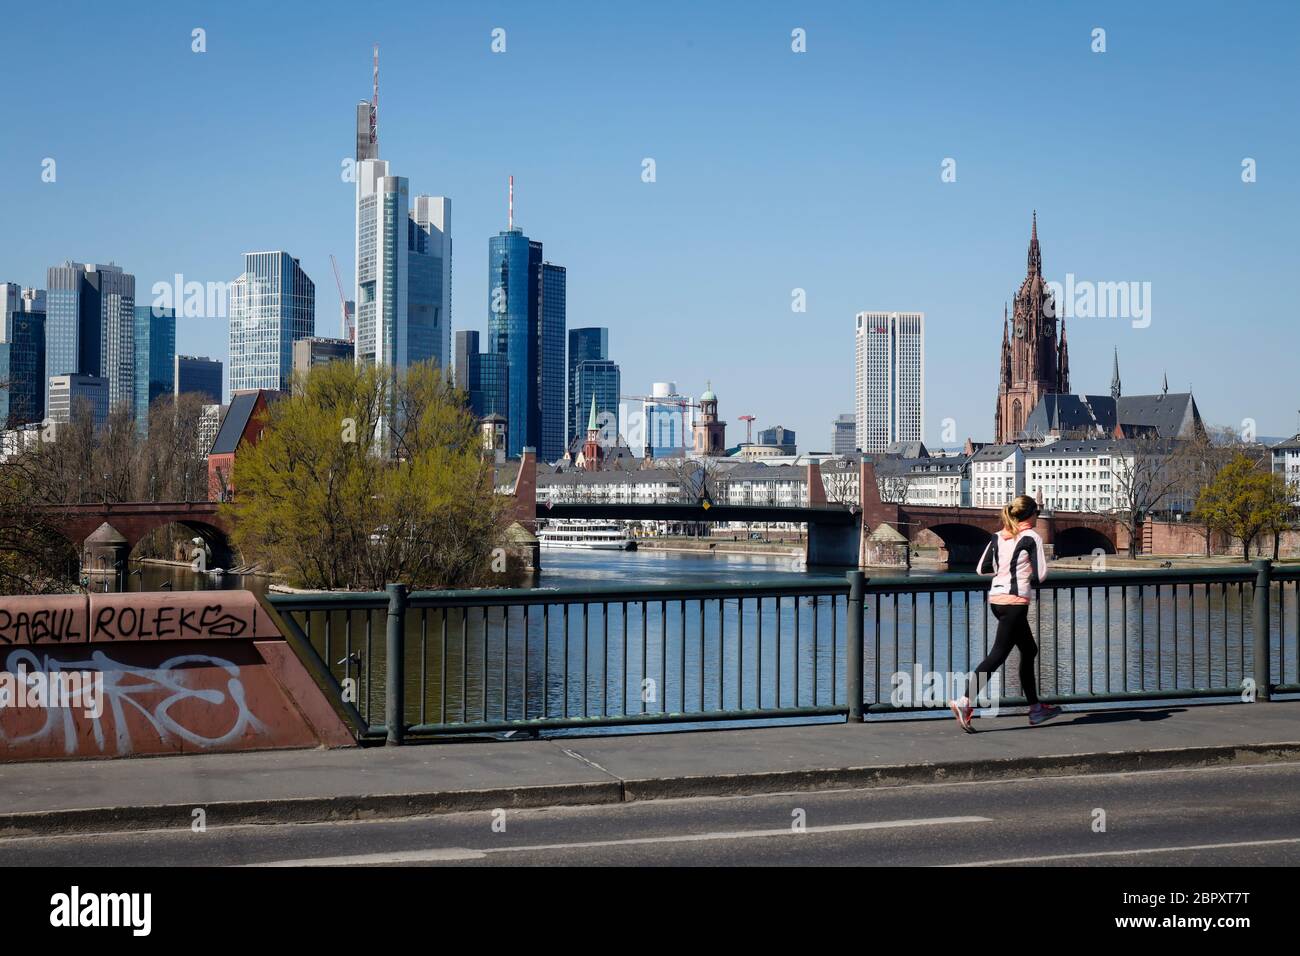 Frankfurt am Main, Hesse, Germany - jogger at the time of the corona crisis with a ban on contact, in the back skyline of downtown Frankfurt. Frankfur Stock Photo